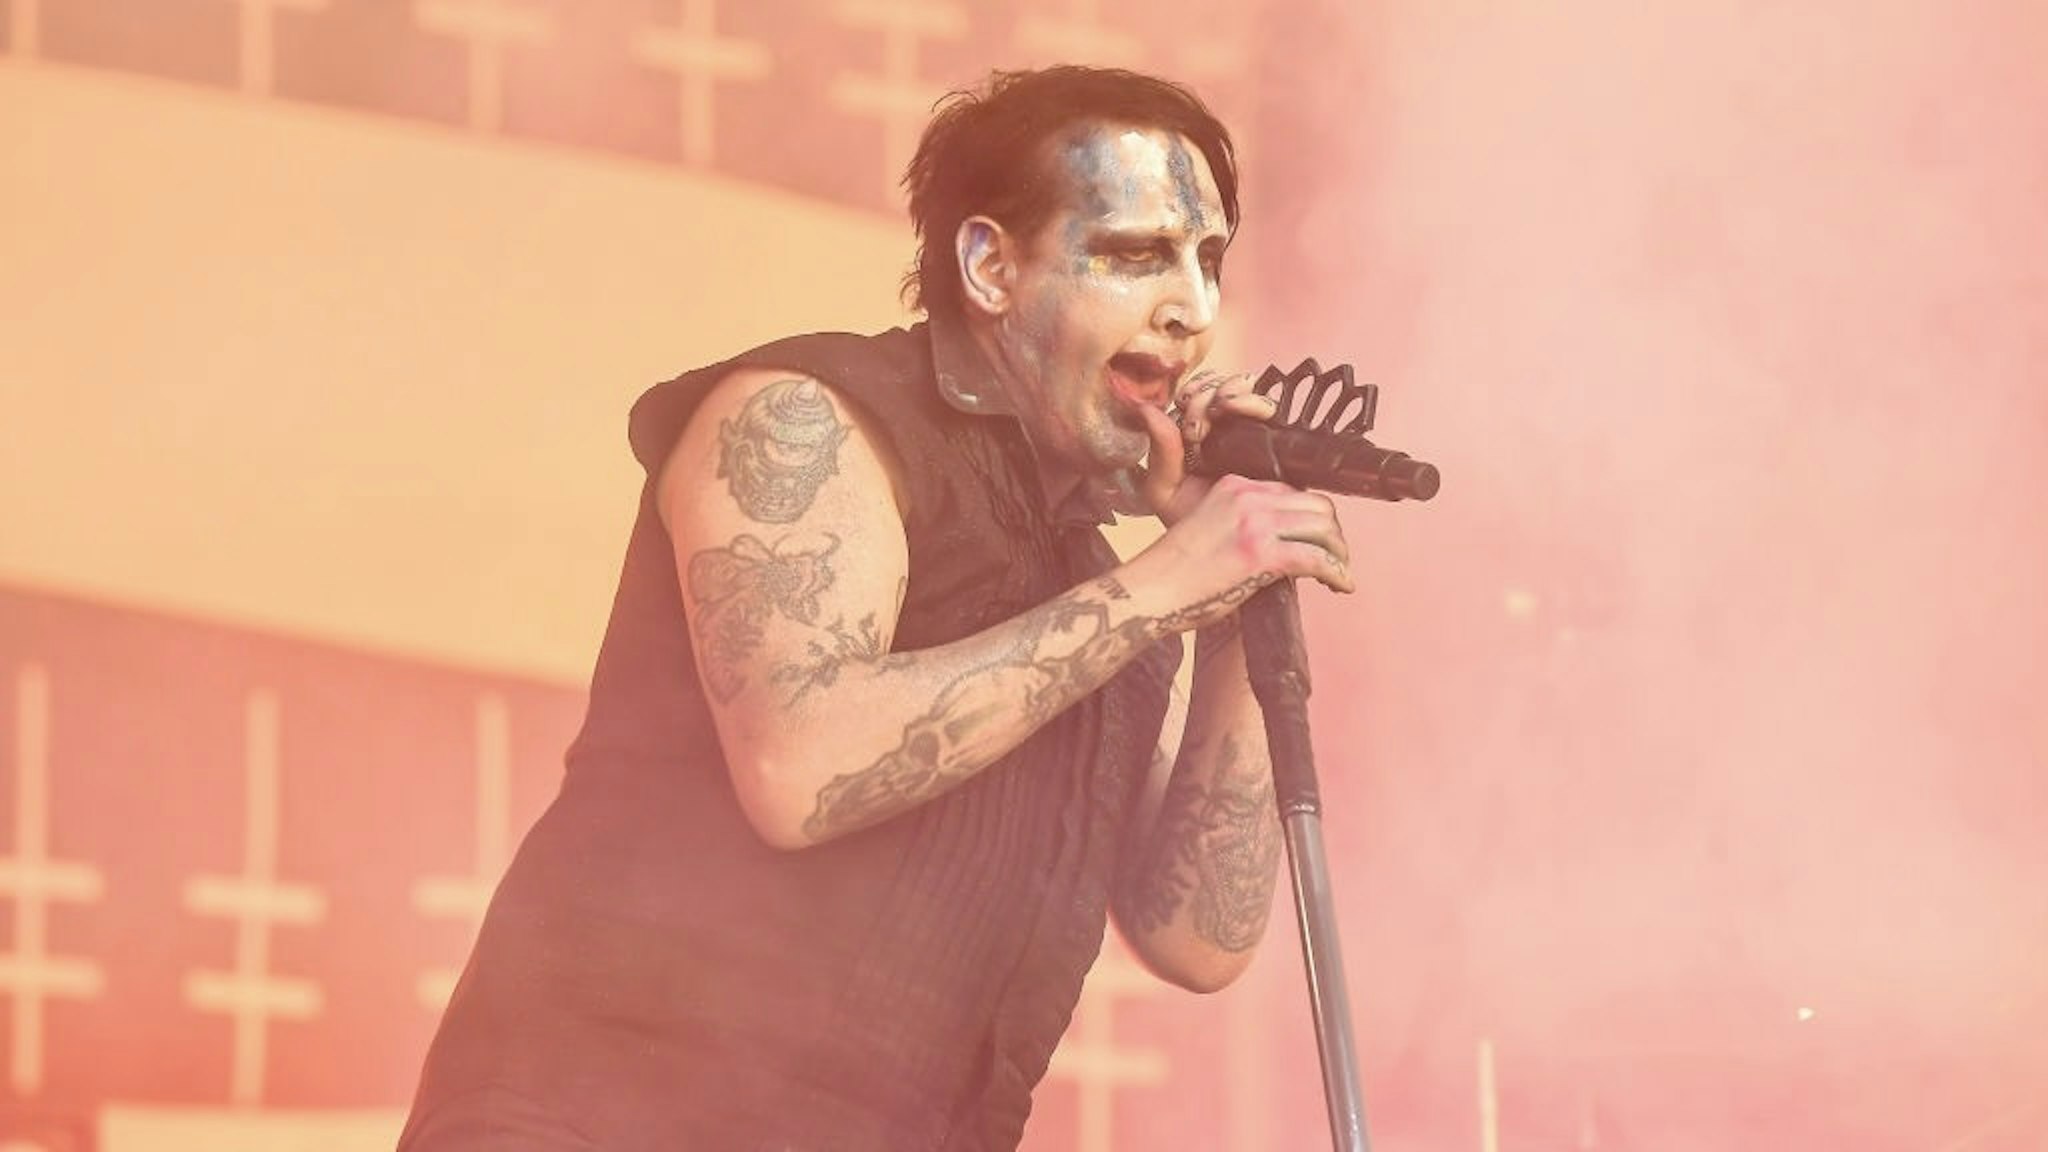 2019 Aftershock Music Festival SACRAMENTO, CA - OCTOBER 12: Singer Marilyn Manson performs on Day 2 of the 2019 Aftershock Music Festival at Discovery Park on October 12, 2019 in Sacramento, California. (Photo by Steve Jennings/WireImage) Steve Jennings / Contributor Photo by Steve Jennings/Contributor/WireImage via Getty Images